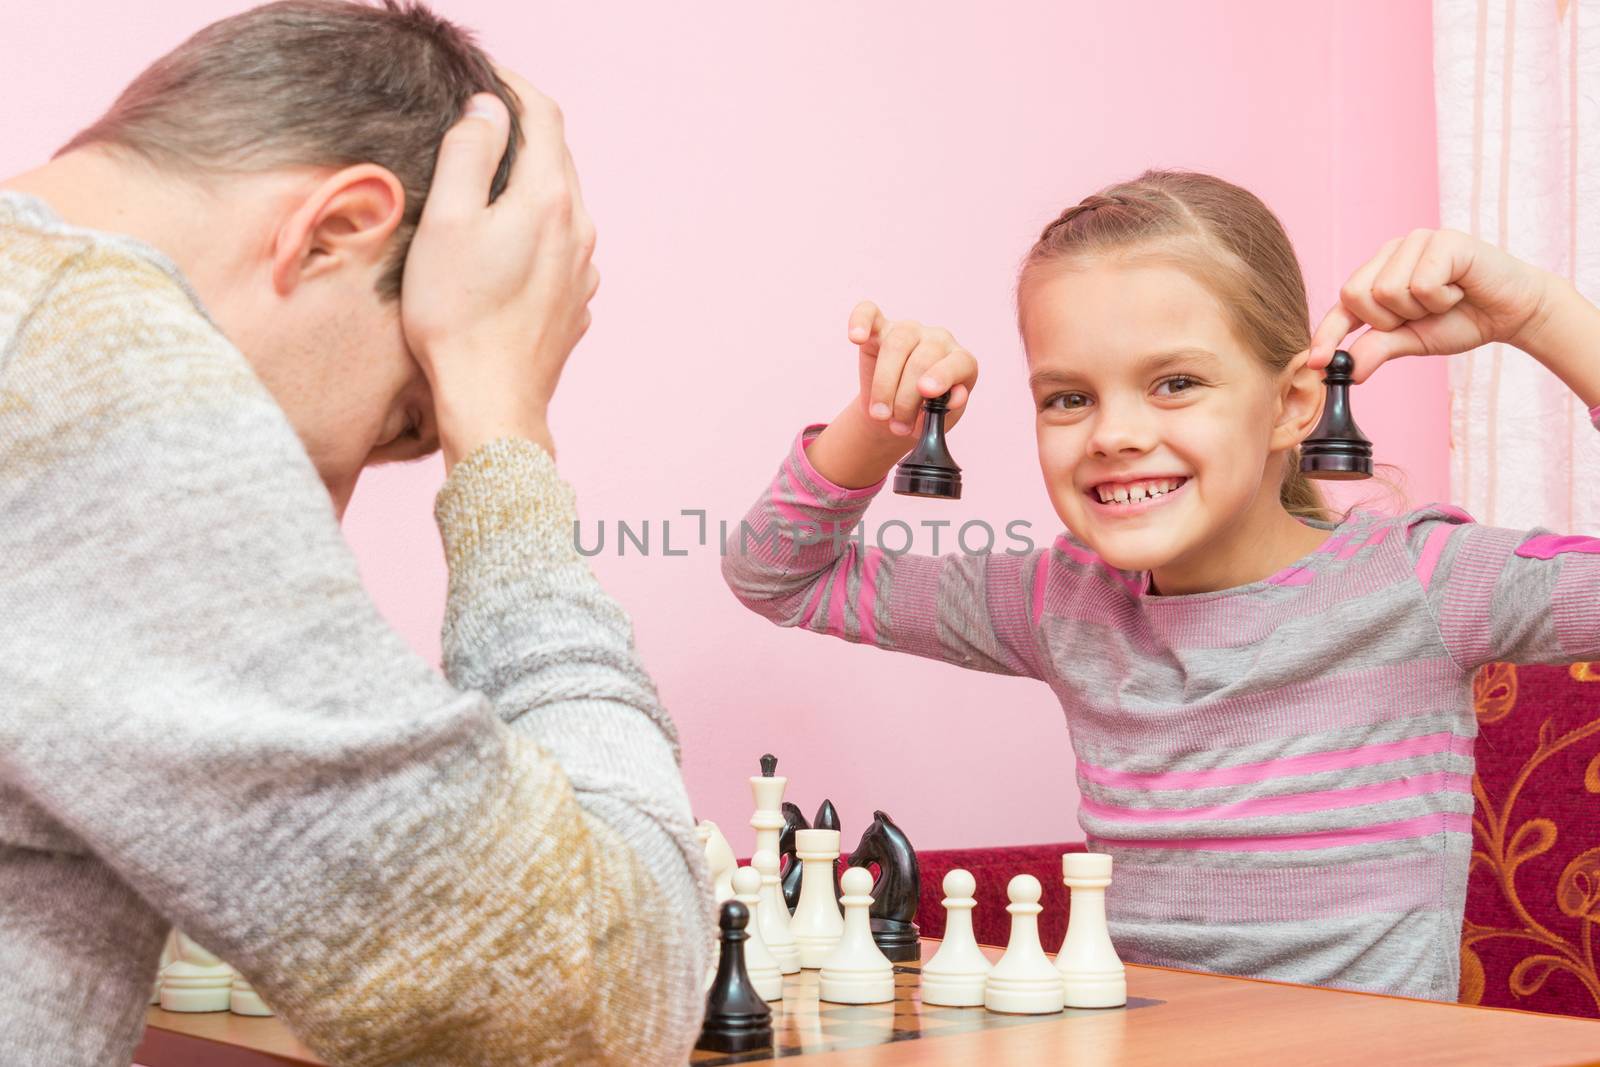 My daughter is happy that the Pope played two pawns and win in chess by Madhourse